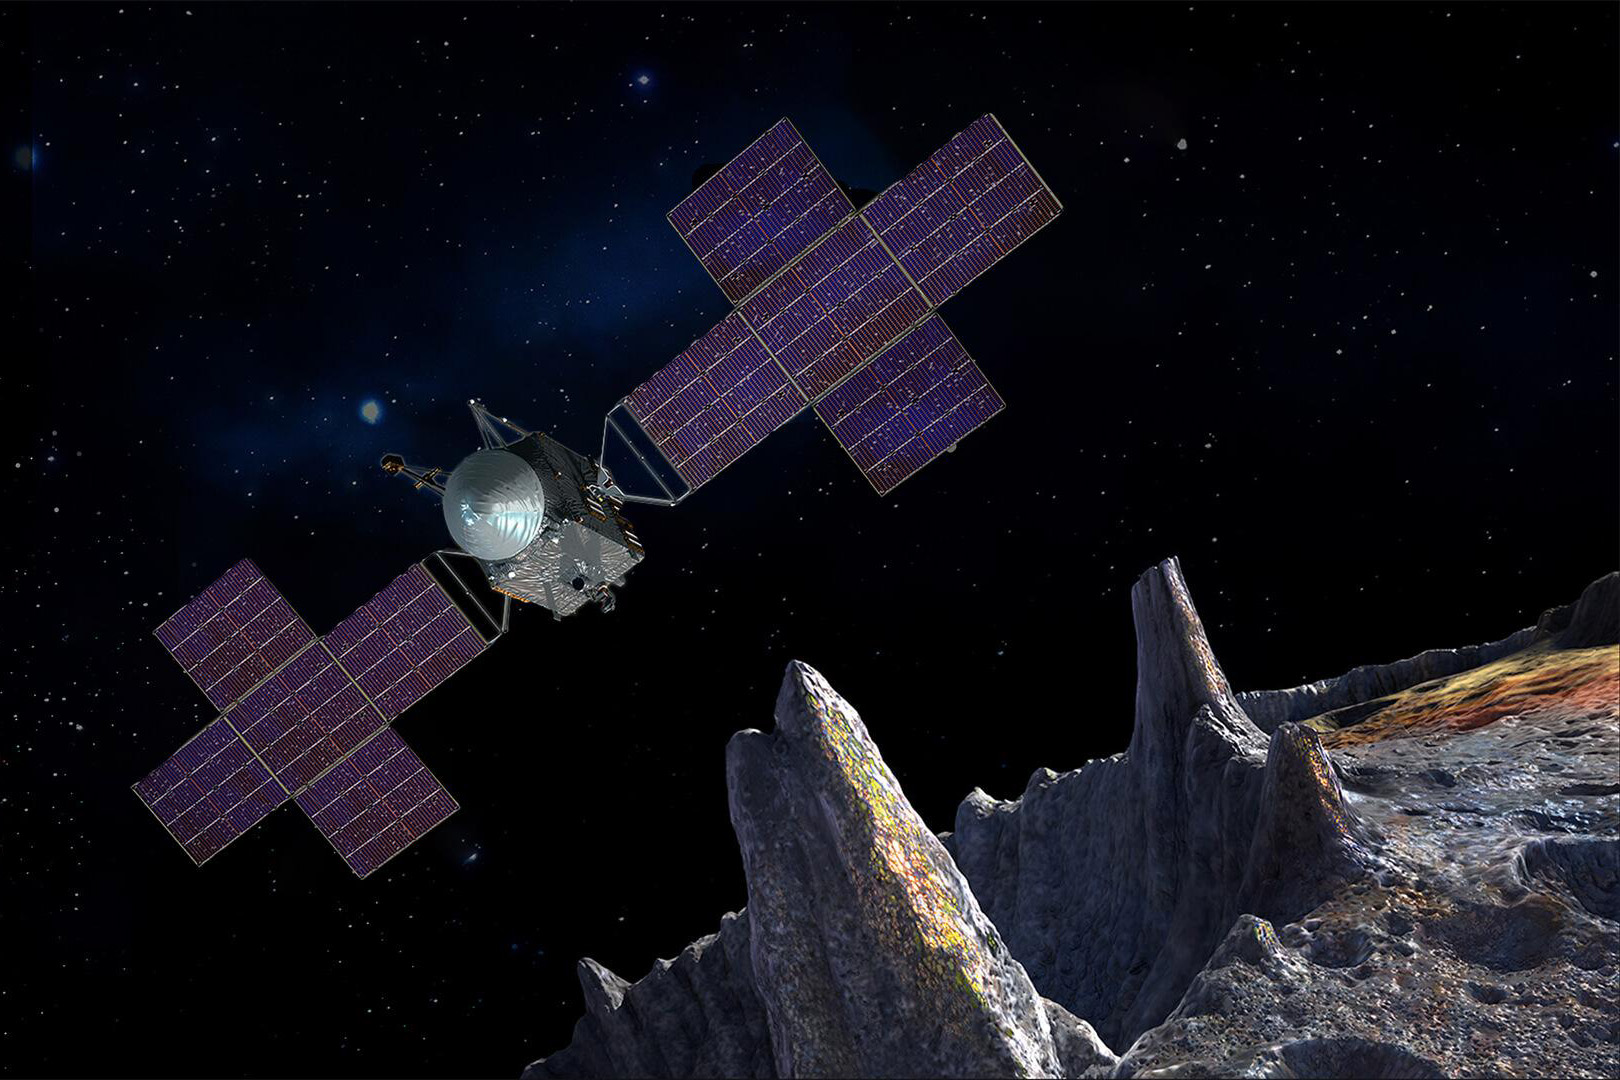 The Psyche spacecraft approaches an asteroid